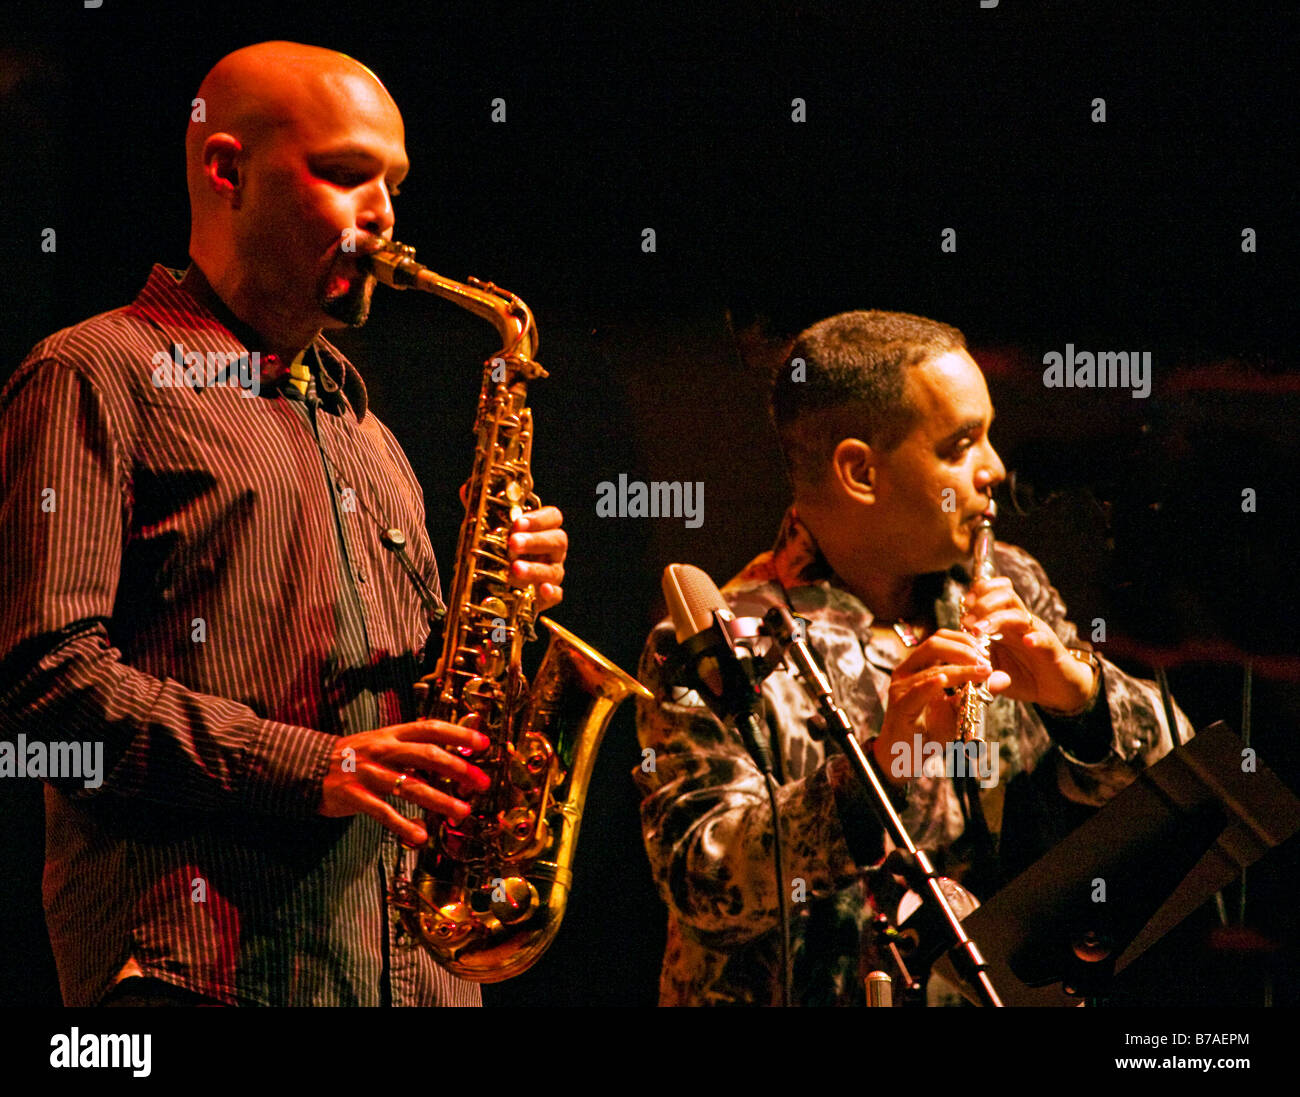 Saxophonist MIGUEL ZENON and flute player ORLANDO VALLE known as MARACA plays Afro Cuban Jazz at the 51st MONTEREY JAZZ FESTIVAL Stock Photo